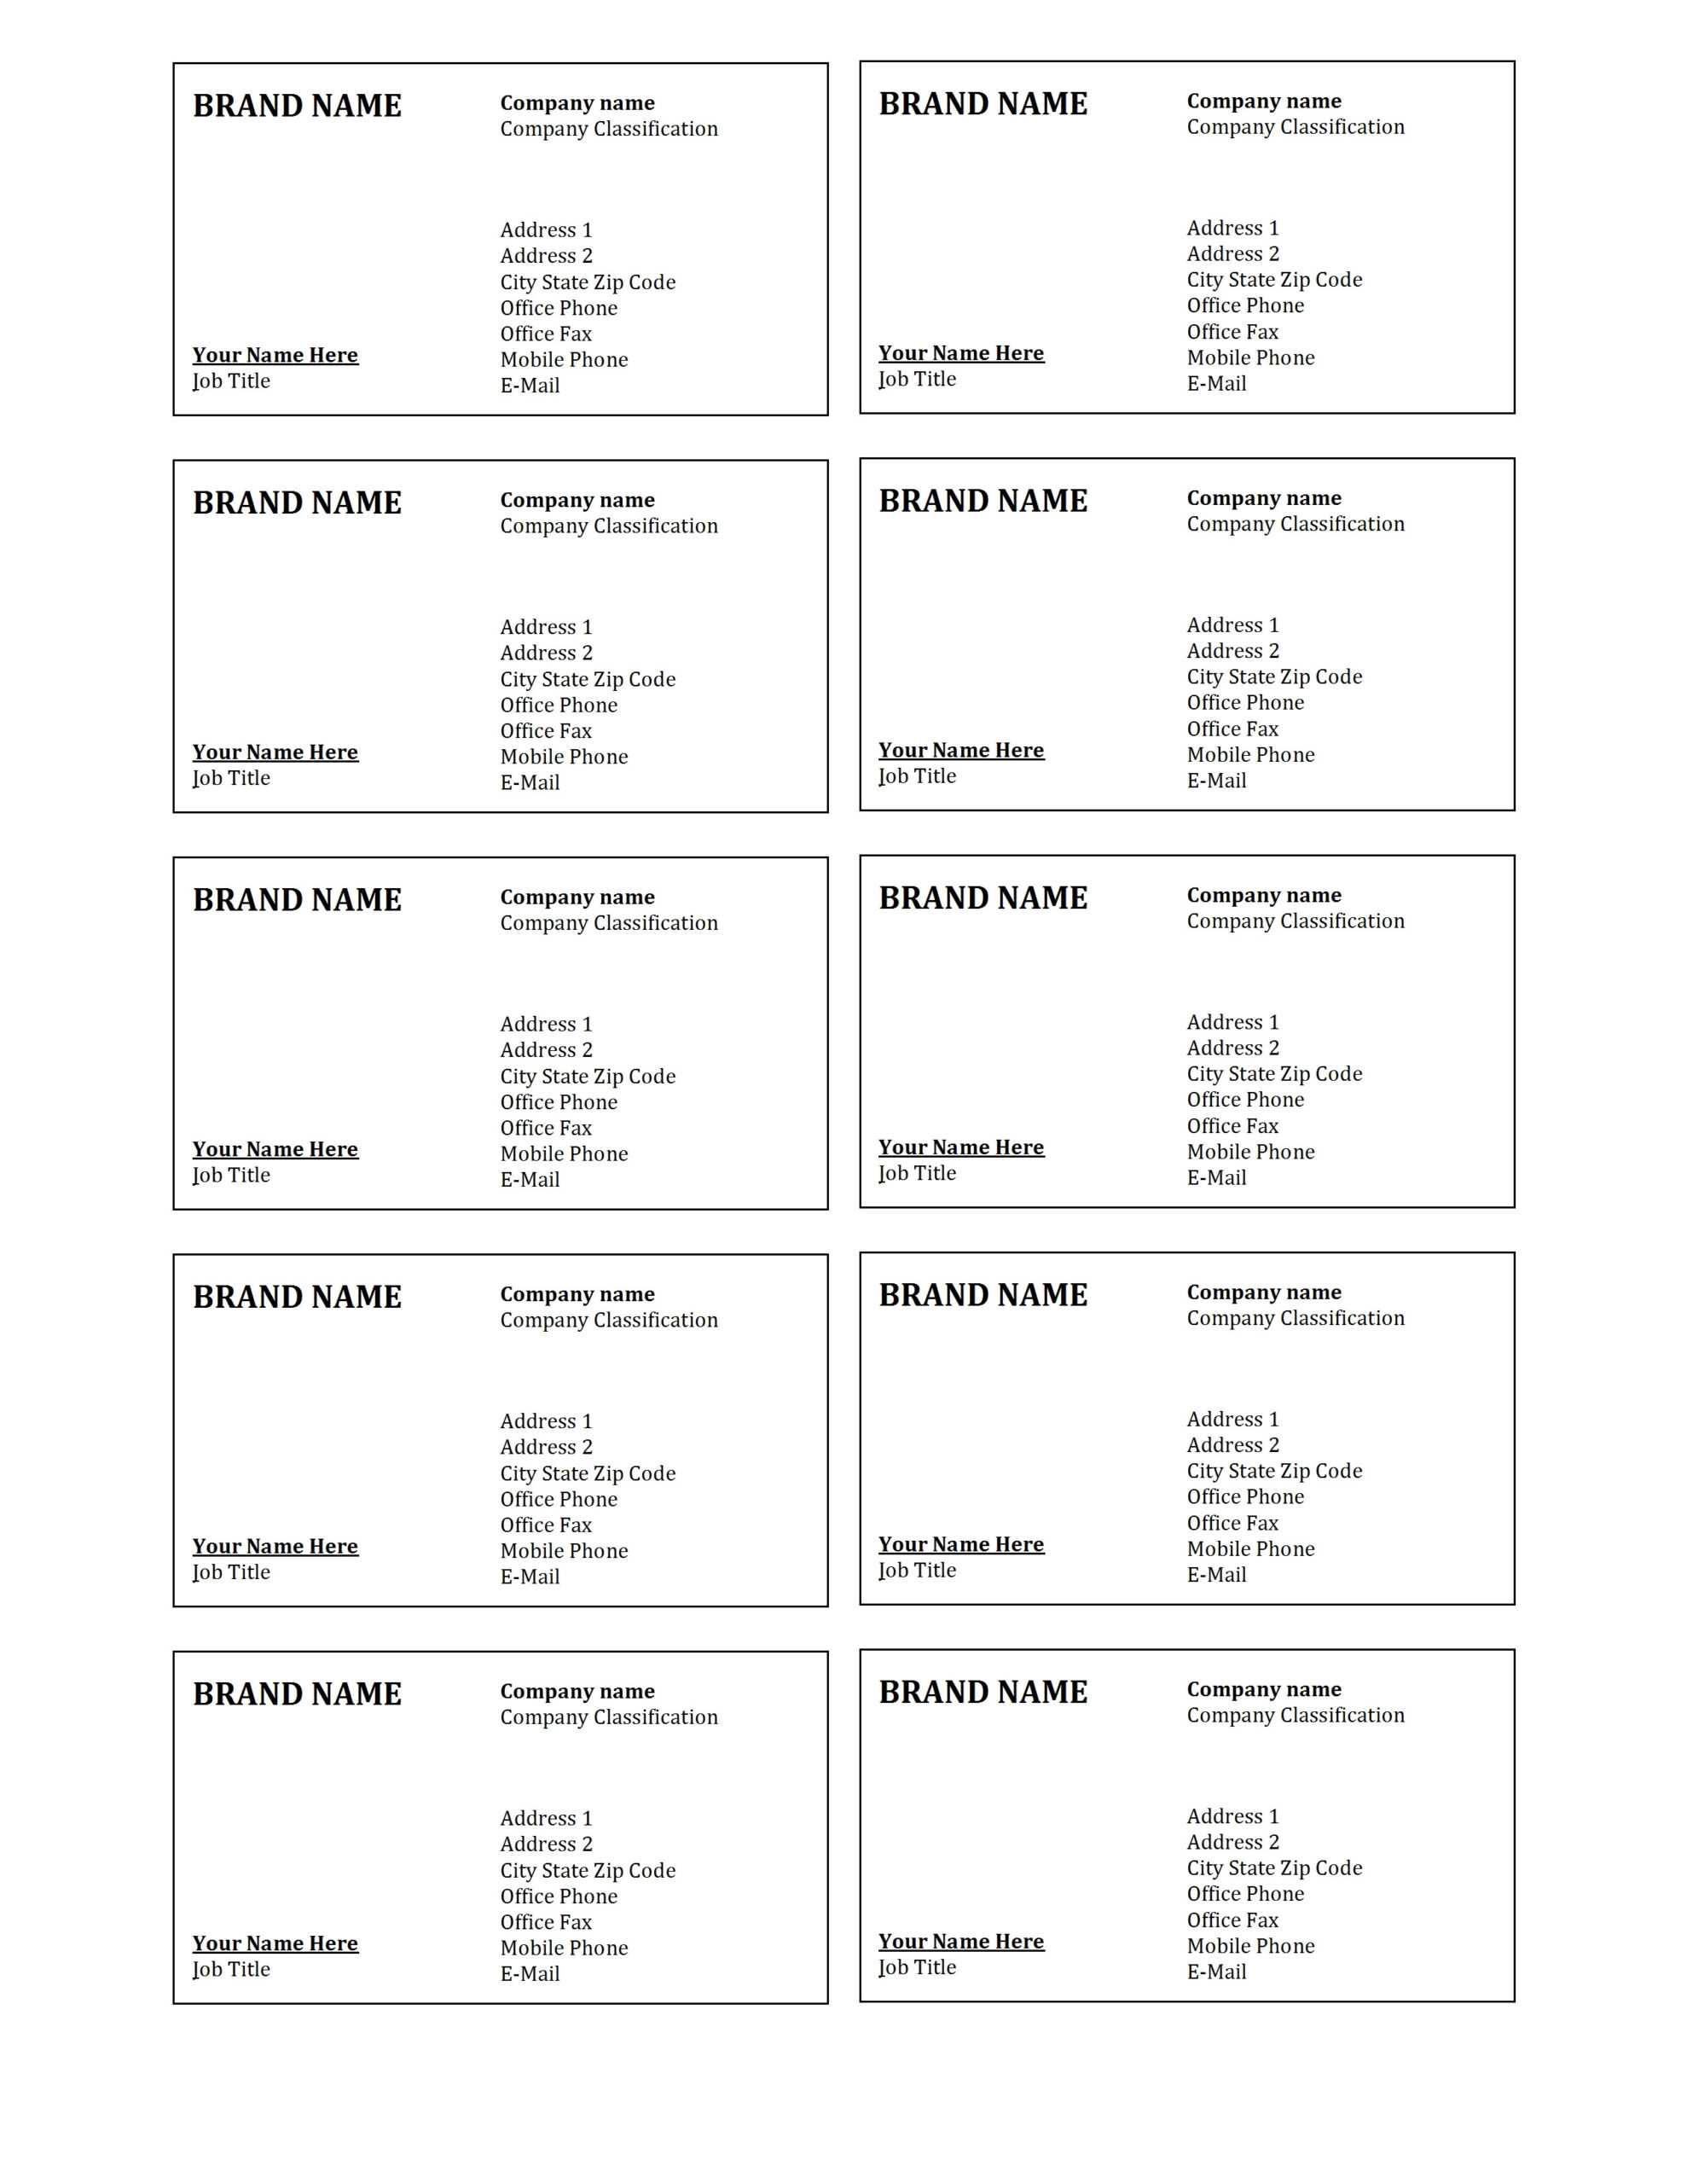 9 Visiting Card Sheet Templates | Fax Cover Sheet Examples Pertaining To Plain Business Card Template Microsoft Word